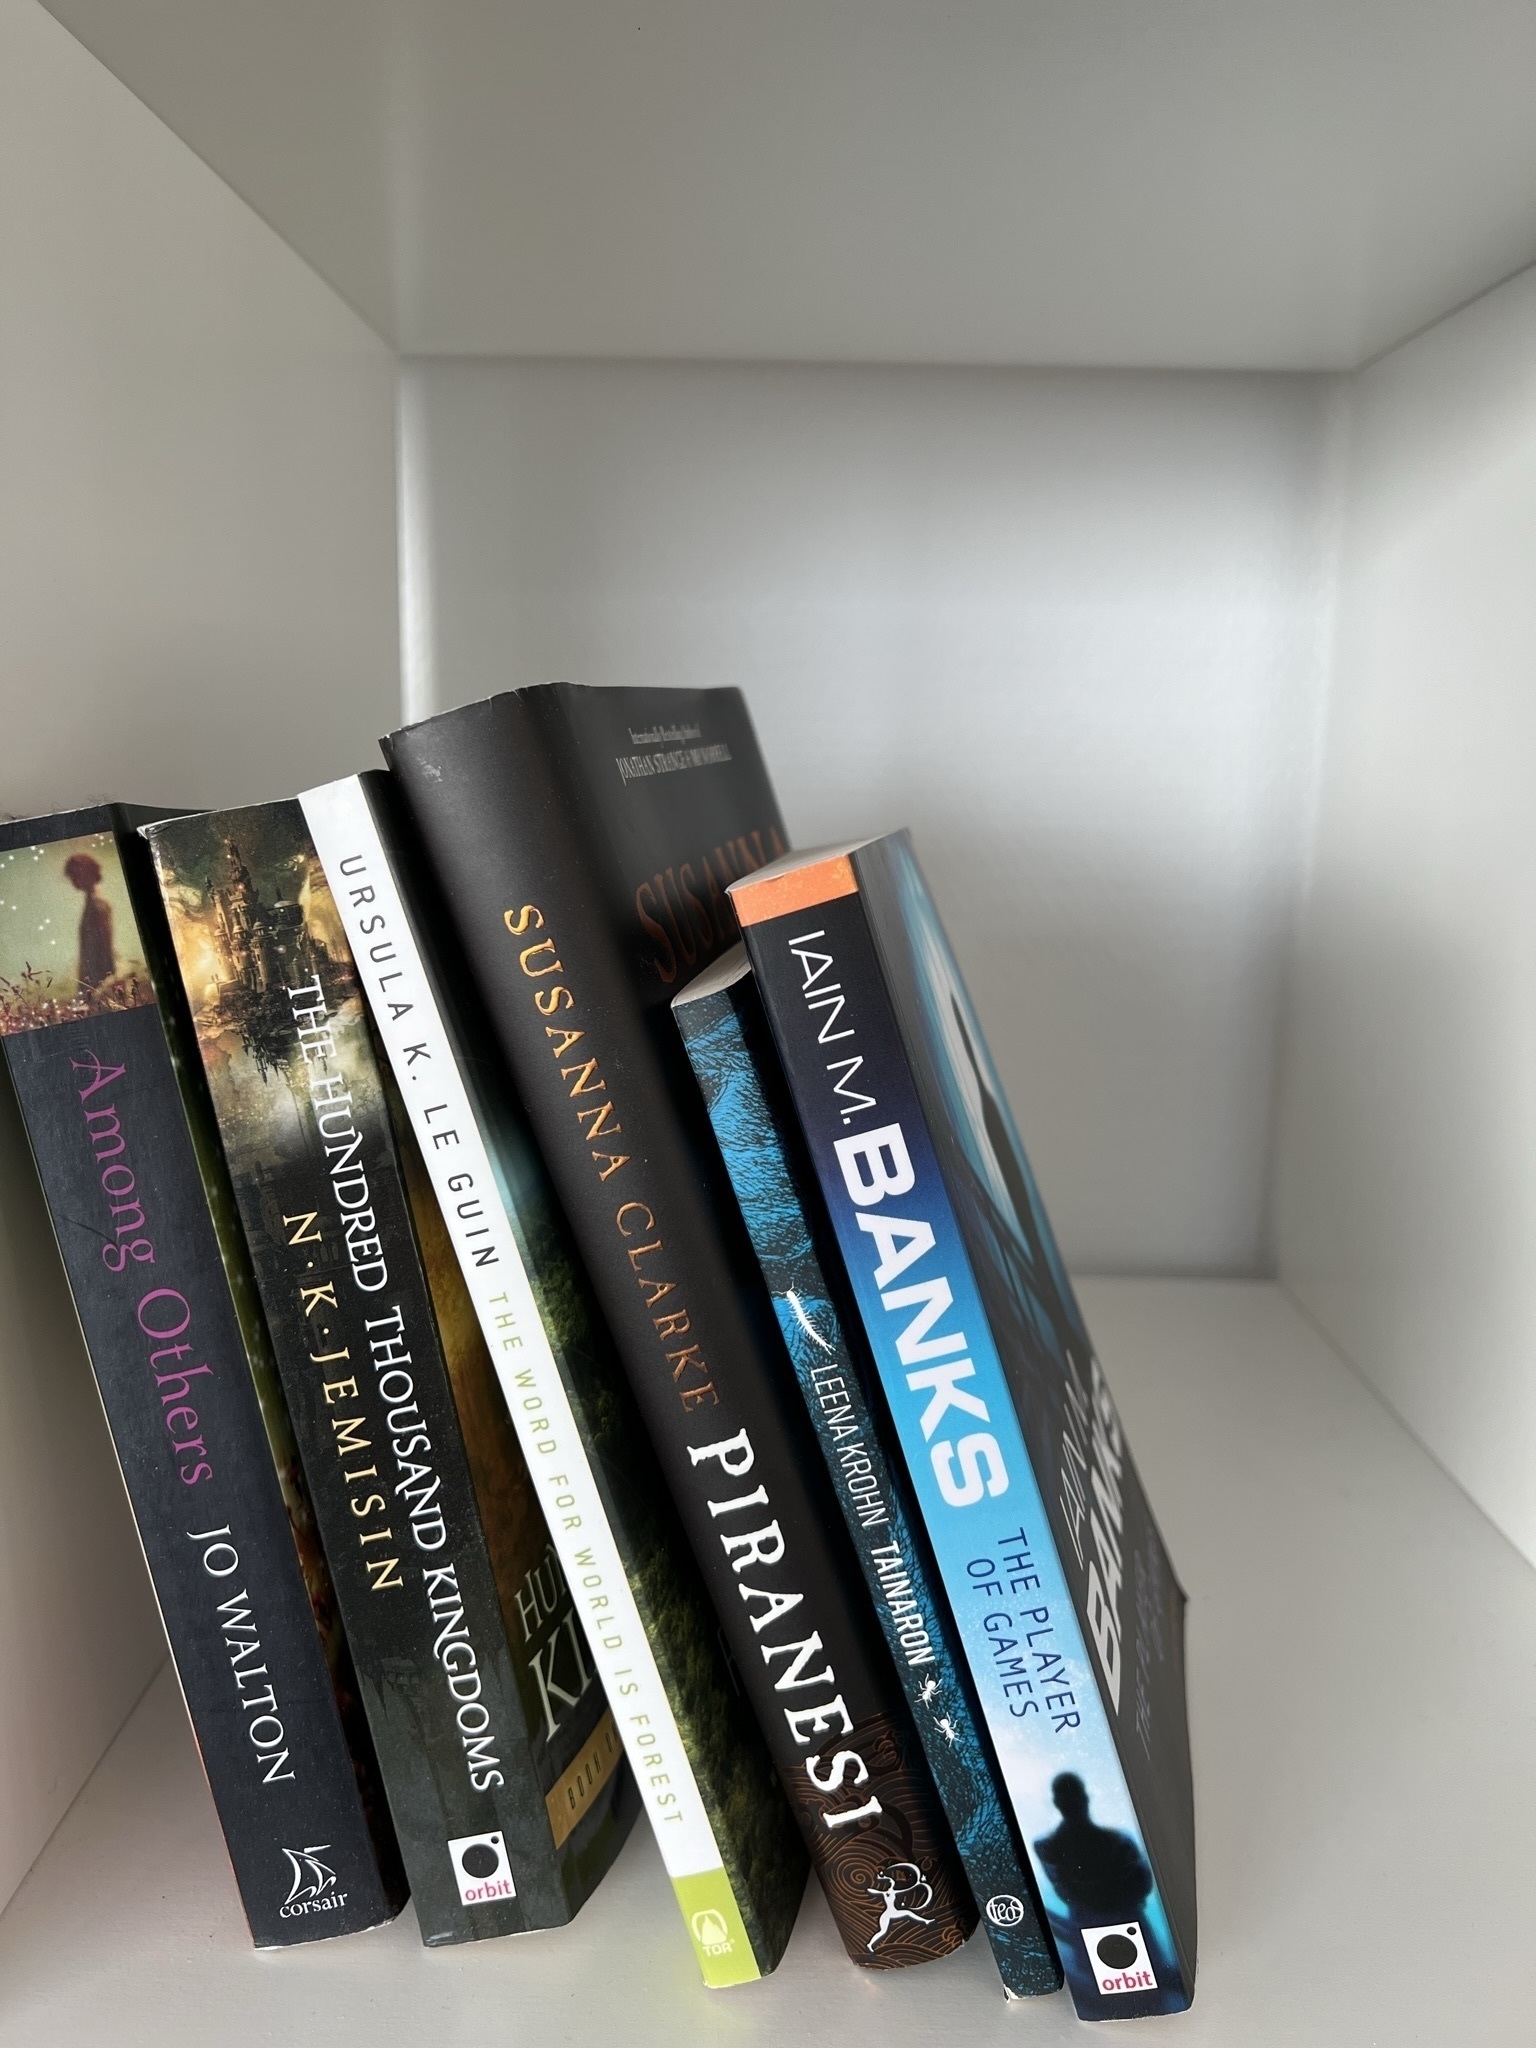 Bookshelf with: Among Others by Jo Walton, The Hundred Thousand Kingdoms by N.K. Jemisin, Ursula K. Le Guin’s The Word for World is Tree, Tainaron by Leena Krohn, and The Player of Games by Iain M. Banks